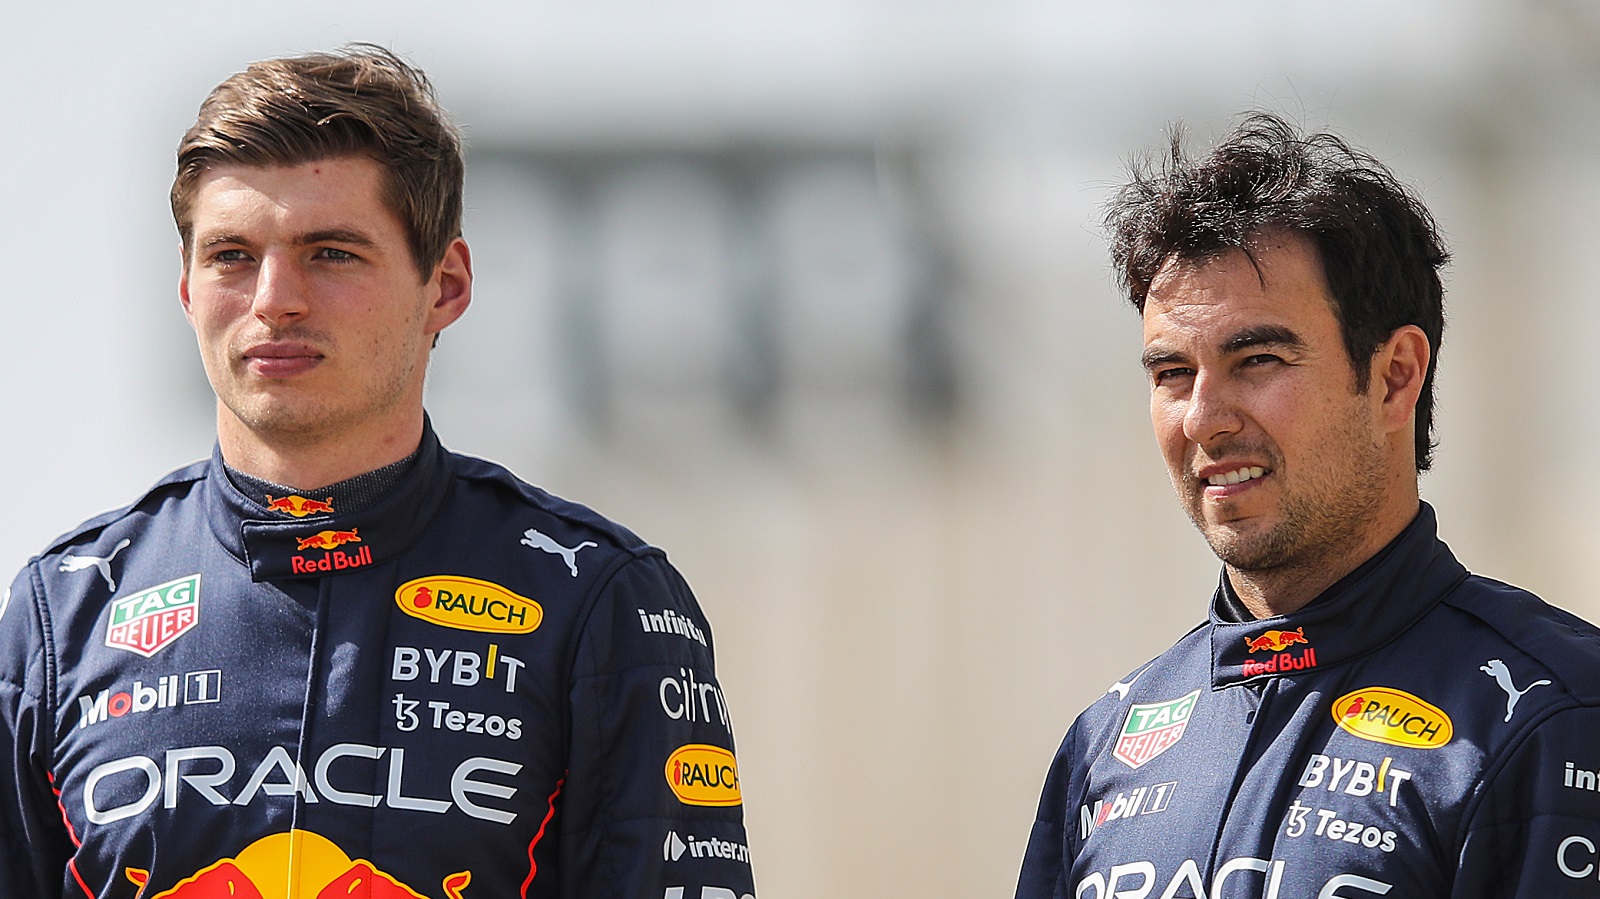 Max Verstappen of the Netherlands and Sergio Perez of Mexico pose for a photo during Formula 1 testing at Bahrain International Circuit on March 10, 2022.